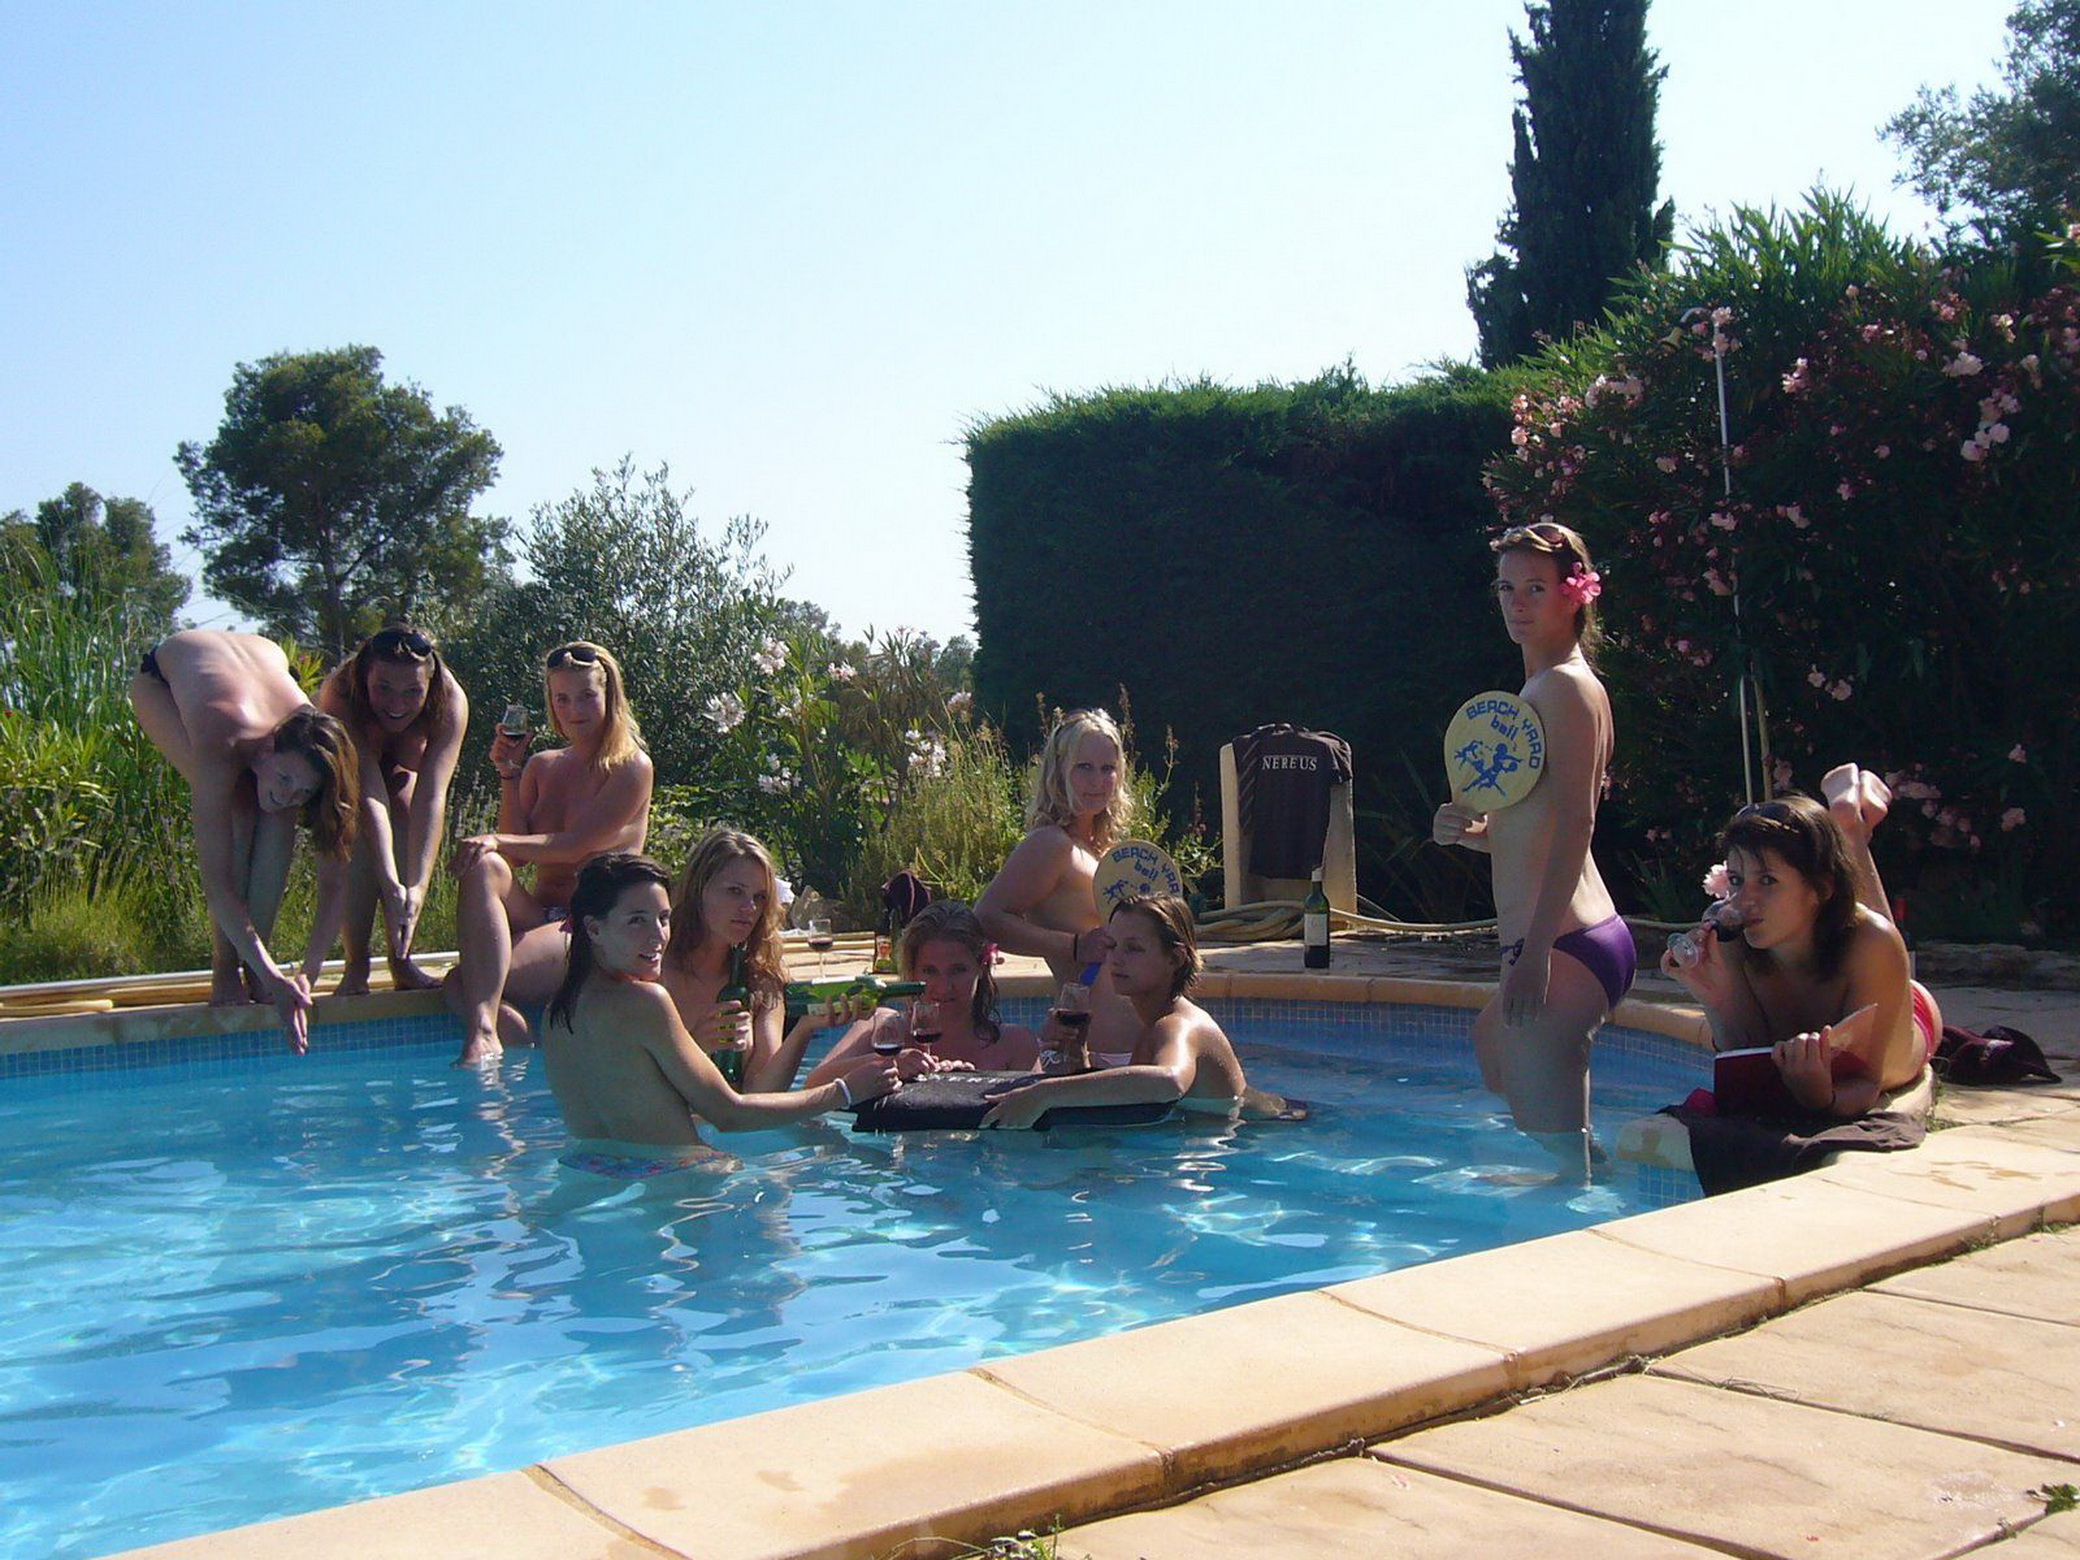 #3 Nude Collegians Girls at a Pool Party